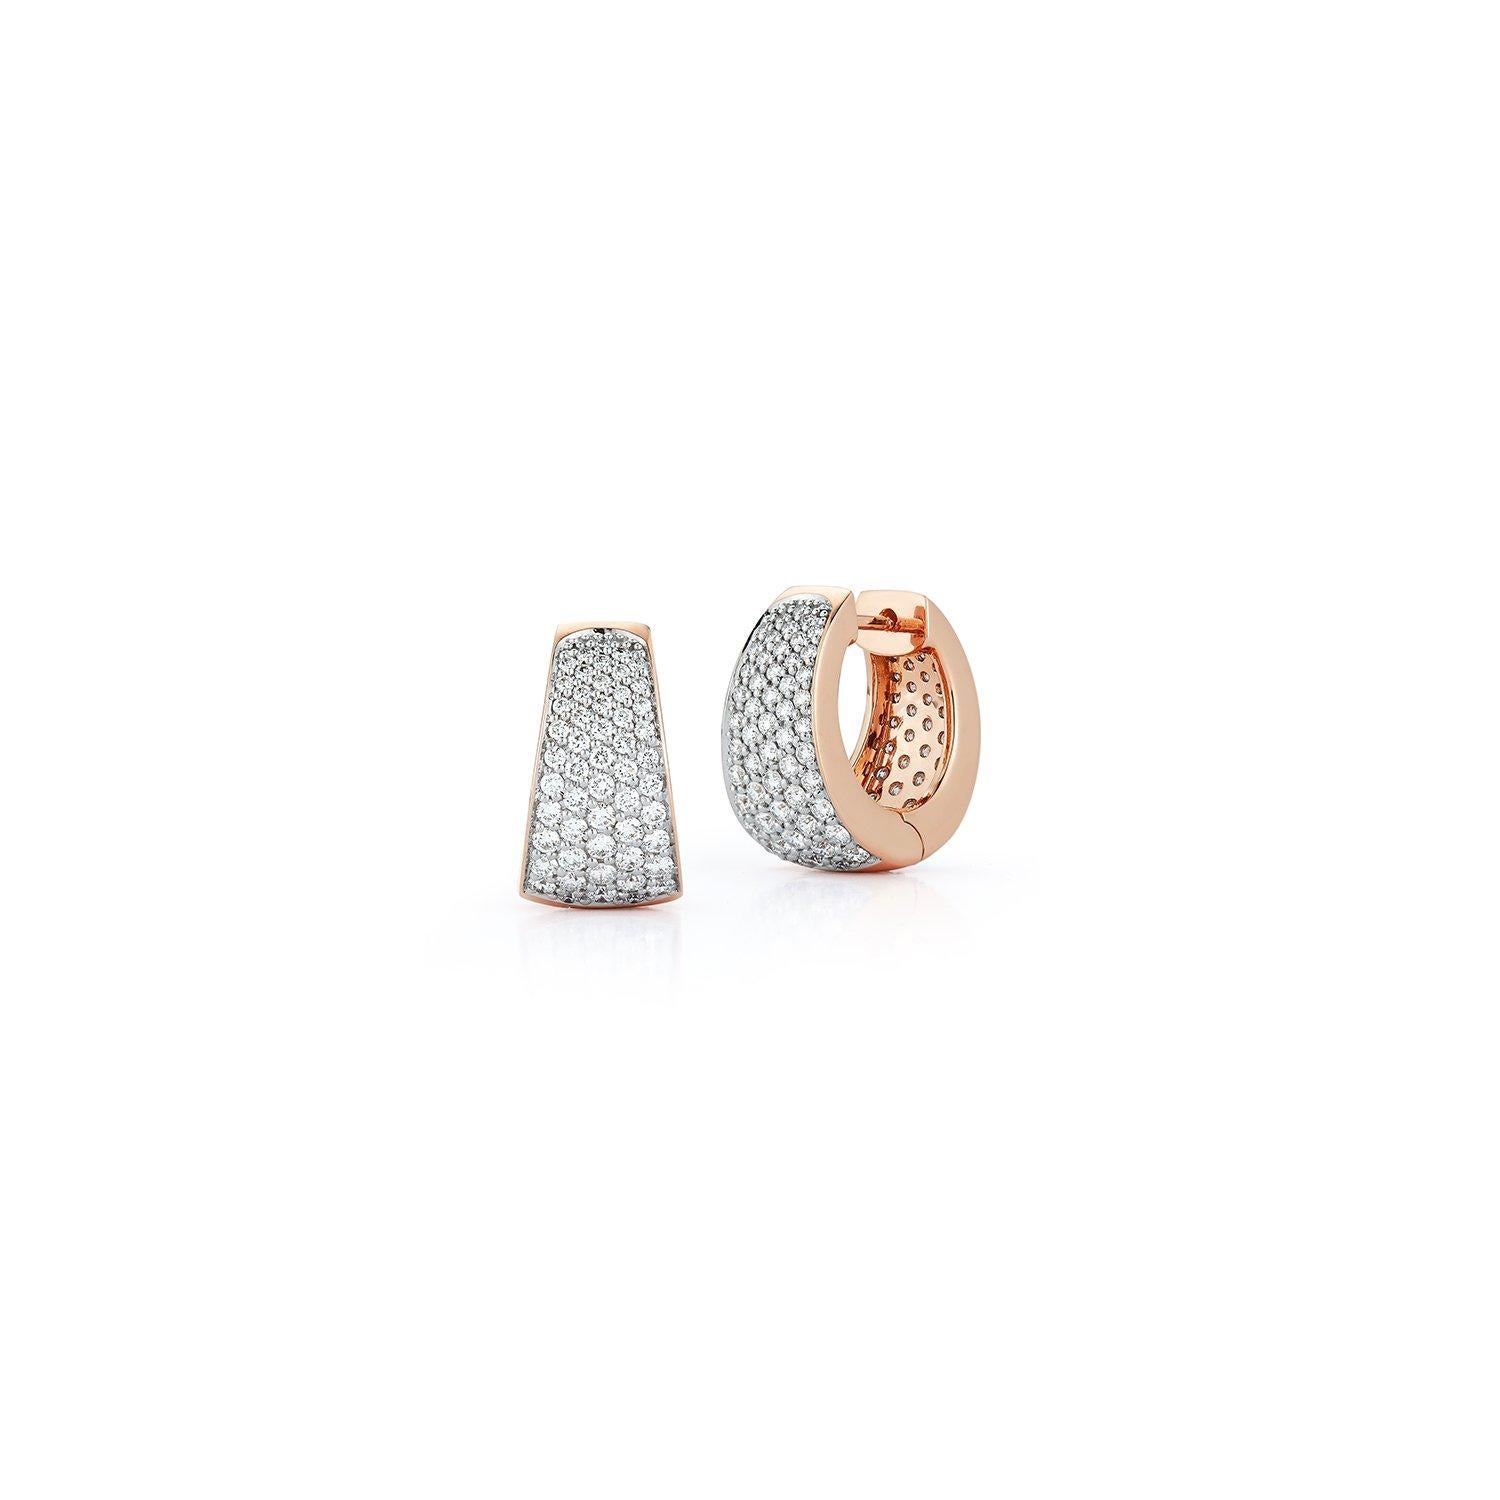 Walters Faith's Lytton Collection 18K Rose Gold and All Diamond Pave Tapering Hoop Earring. 2.180 Diamond Carat Weight. Can be custom ordered in 18K yellow or 18k white gold. Please contact us with any questions or special requests. 